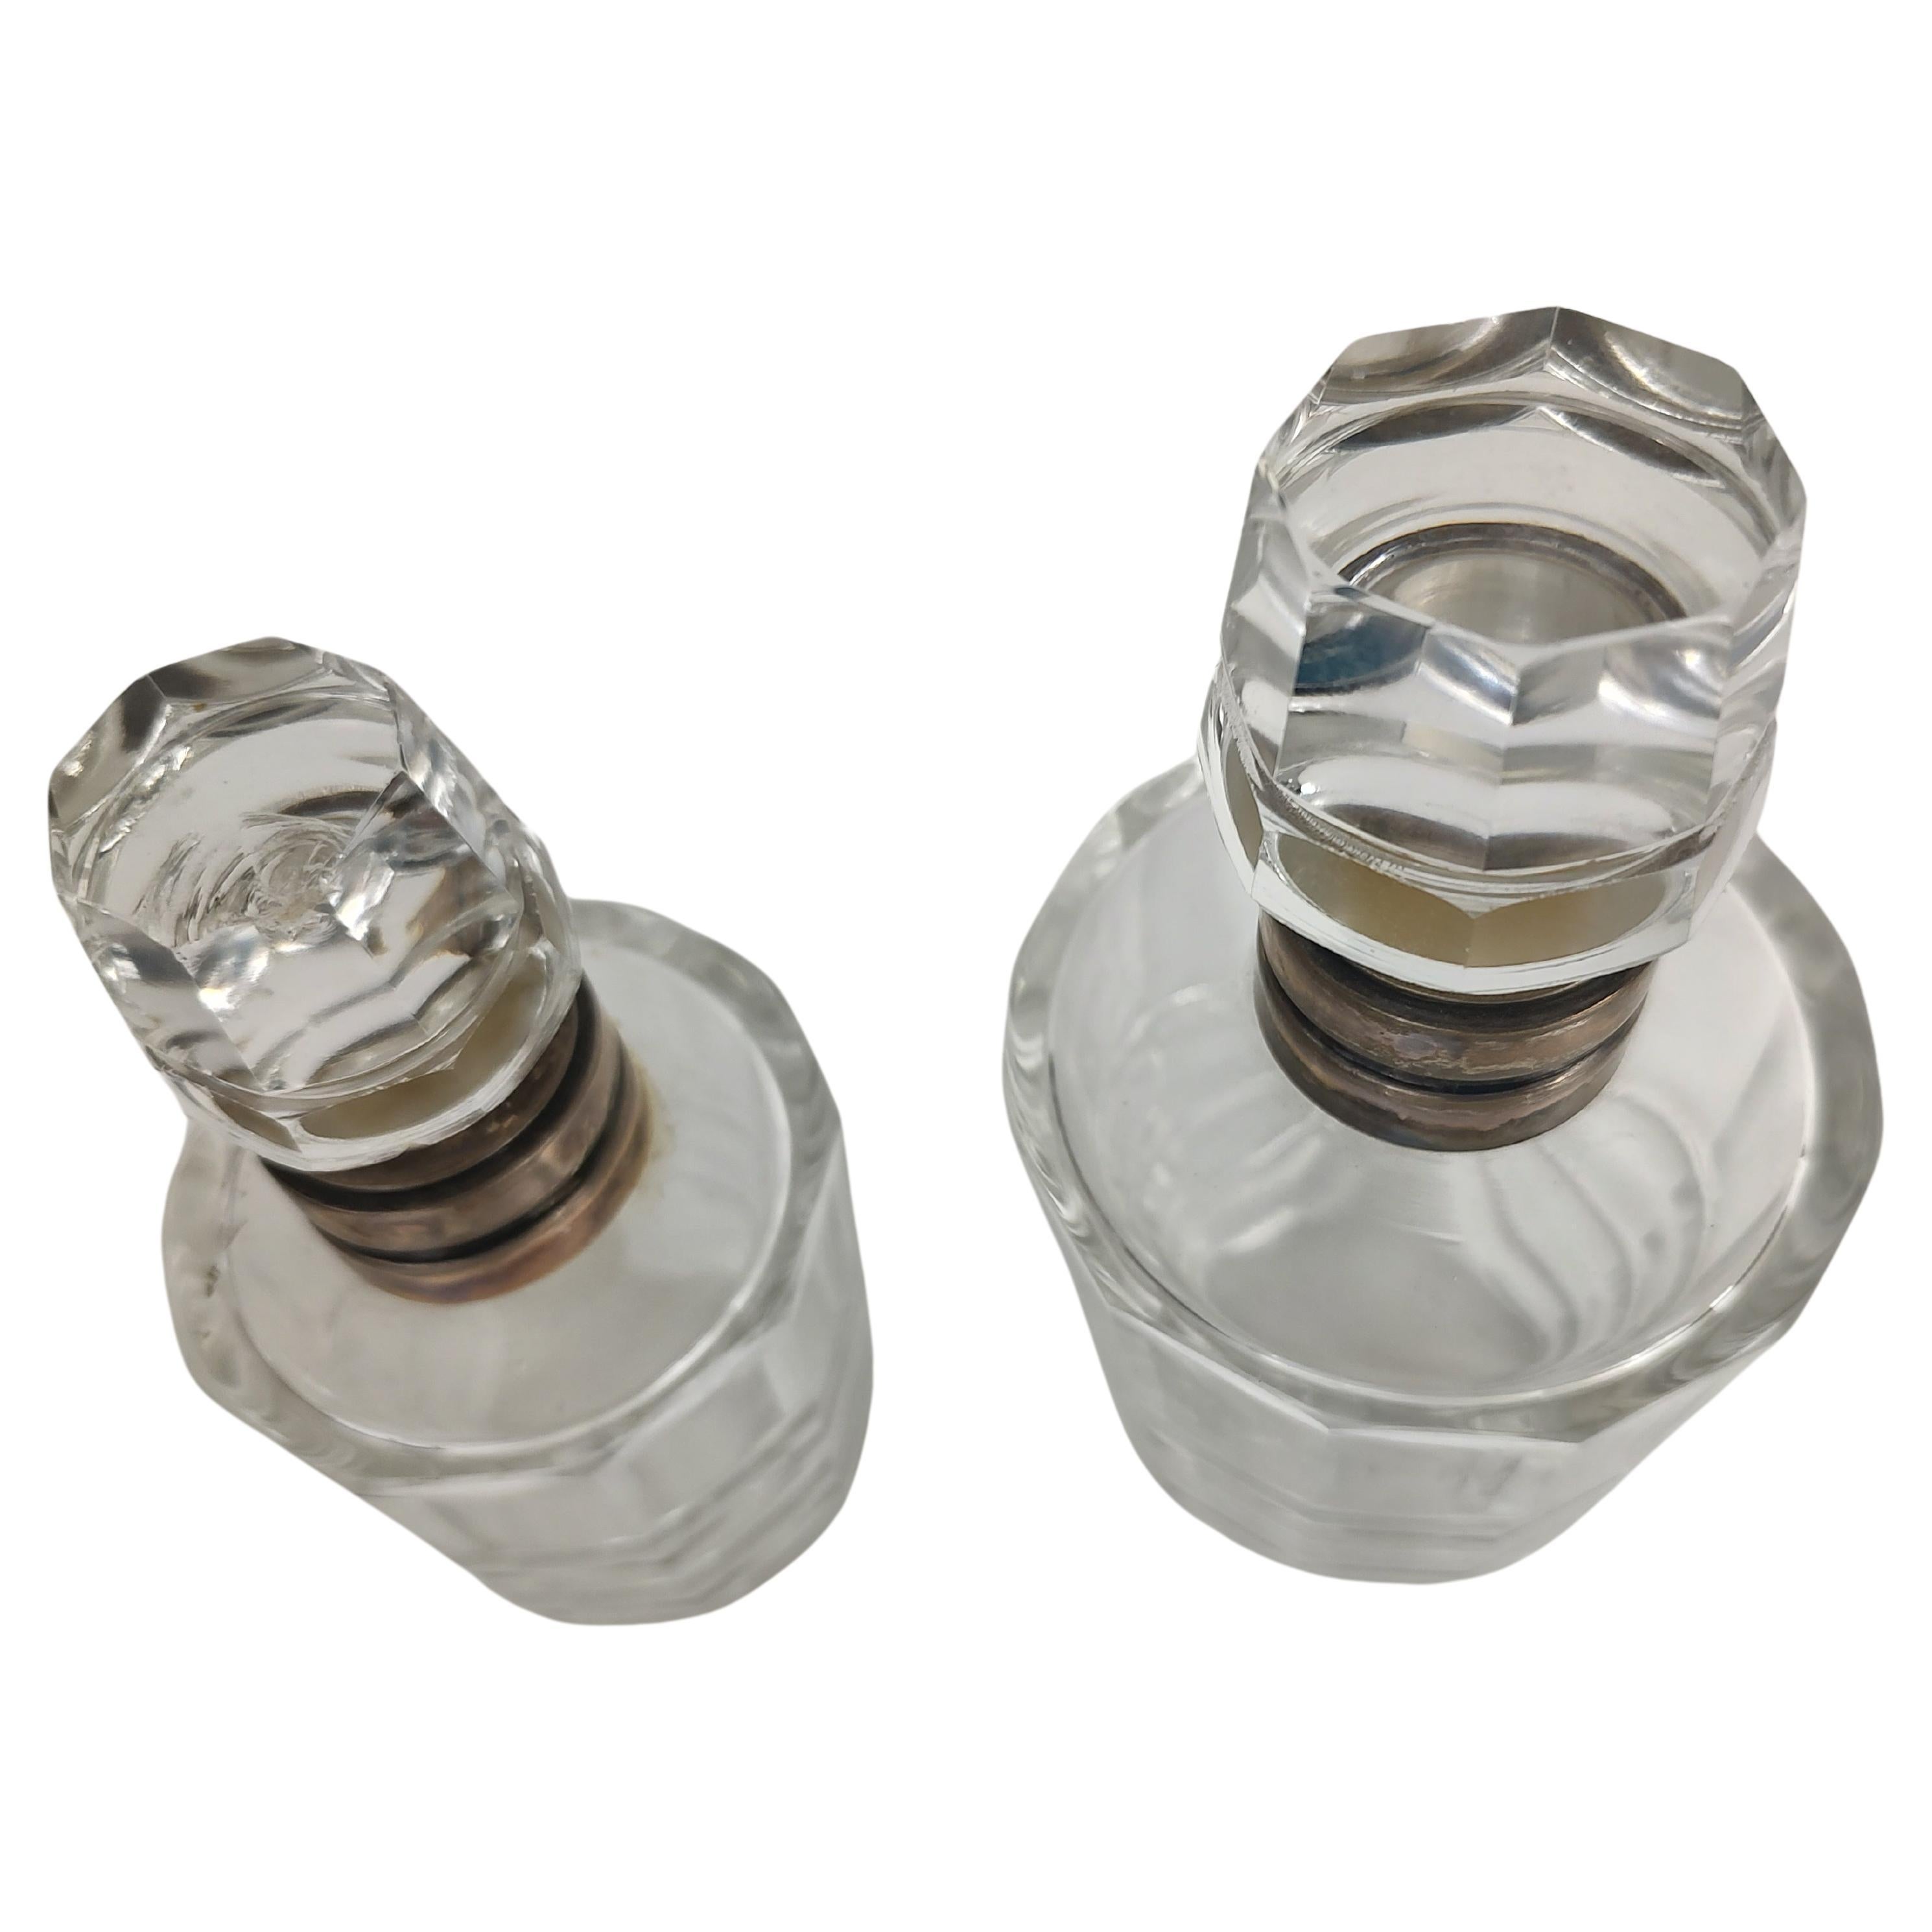 Fabulous pair of cut glass dresser bottles with Sterling collars. Smaller bottle has a chip on the stopper. Other than that they are in excellent vintage condition with minimal wear. Sold and priced as a set.